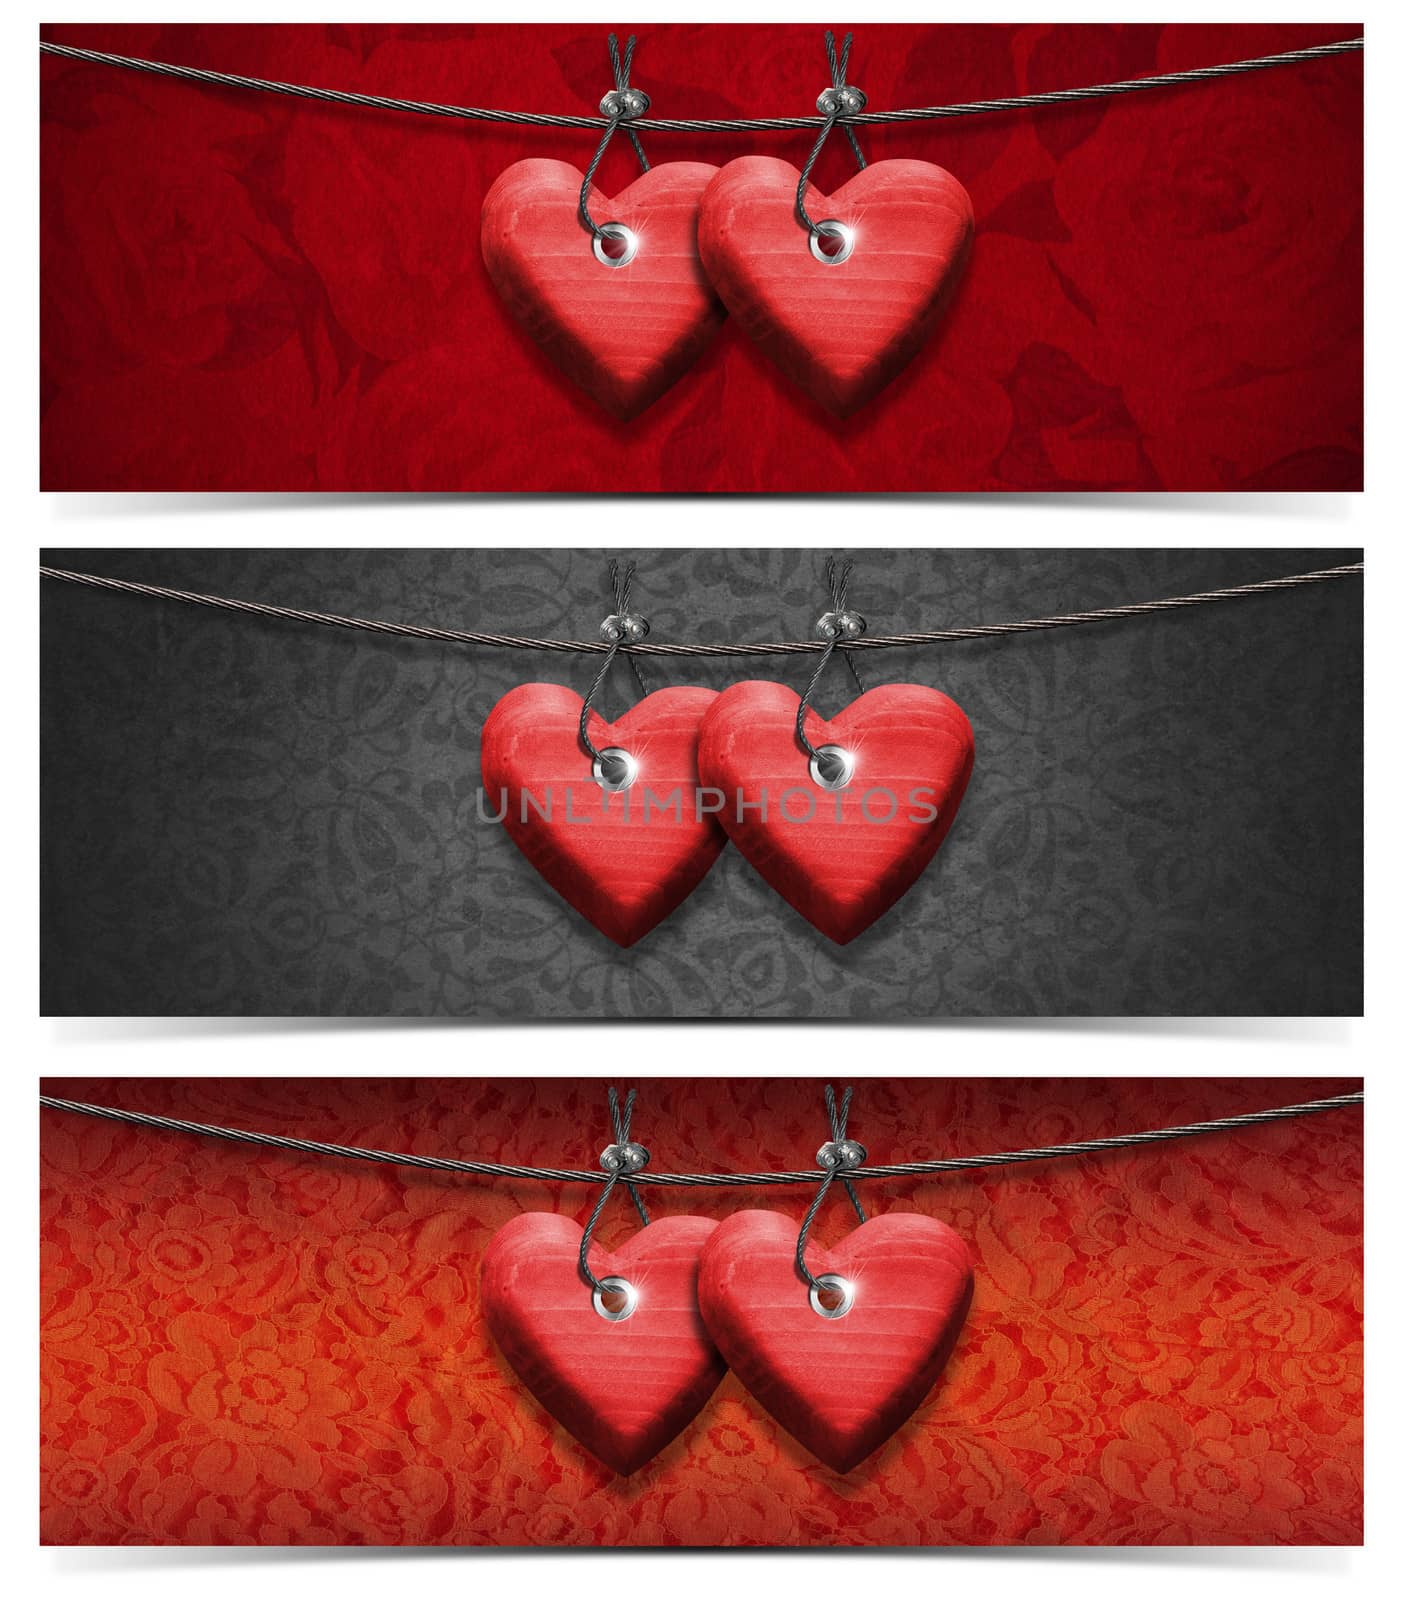 Two handmade red wooden hearts hanging on a steel cable on fabric background
